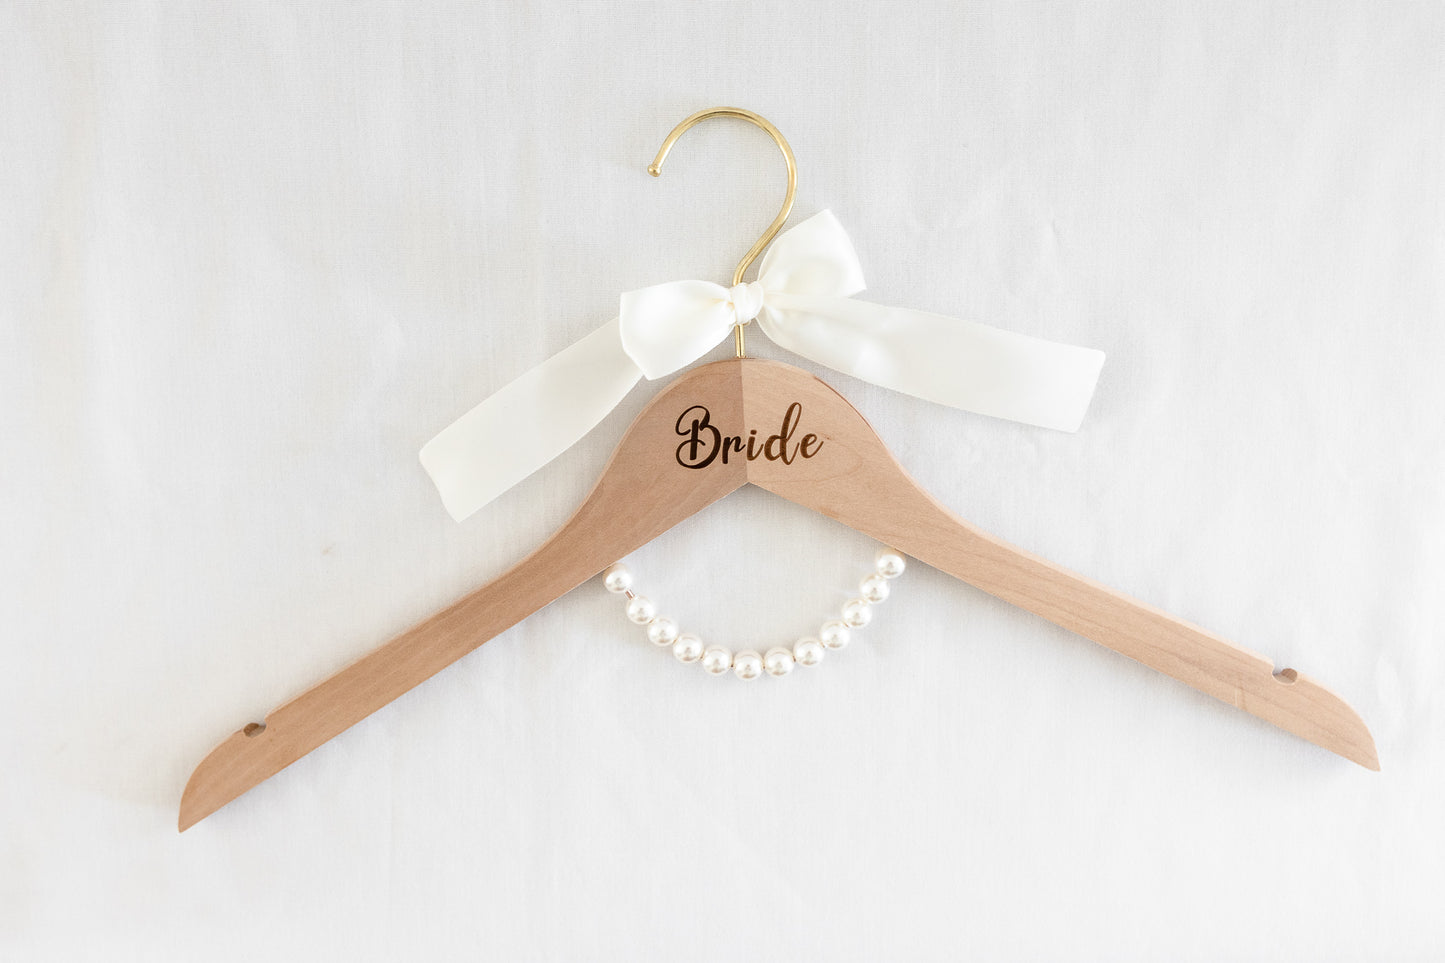  Bridal hanger featuring pearl necklace and personalized name